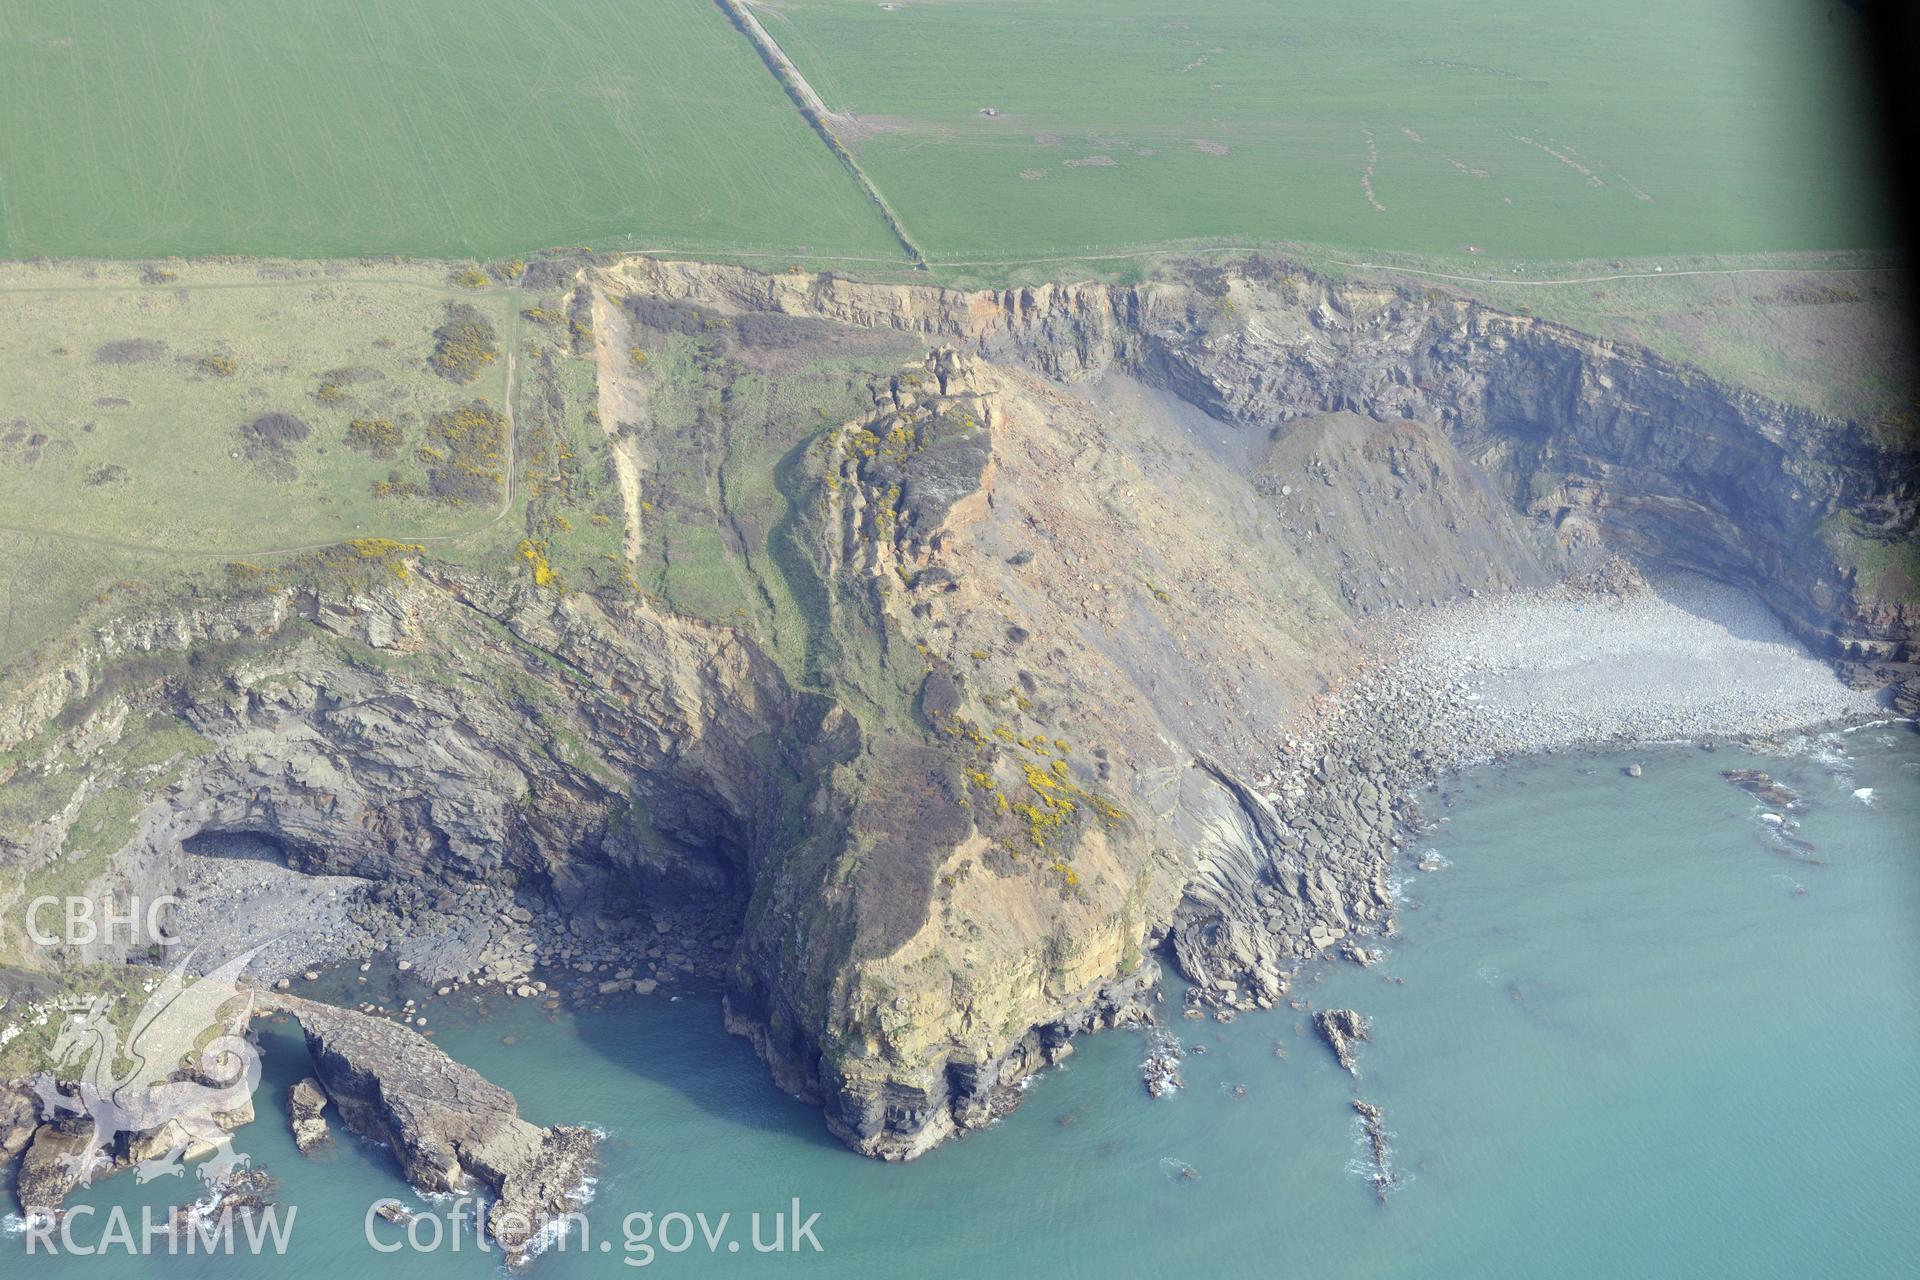 Aerial photography of Black Point Rath taken on 27th March 2017 for structure from motion monitoring. Baseline aerial reconnaissance survey for the CHERISH Project. ? Crown: CHERISH PROJECT 2017. Produced with EU funds through the Ireland Wales Co-operation Programme 2014-2020. All material made freely available through the Open Government Licence.